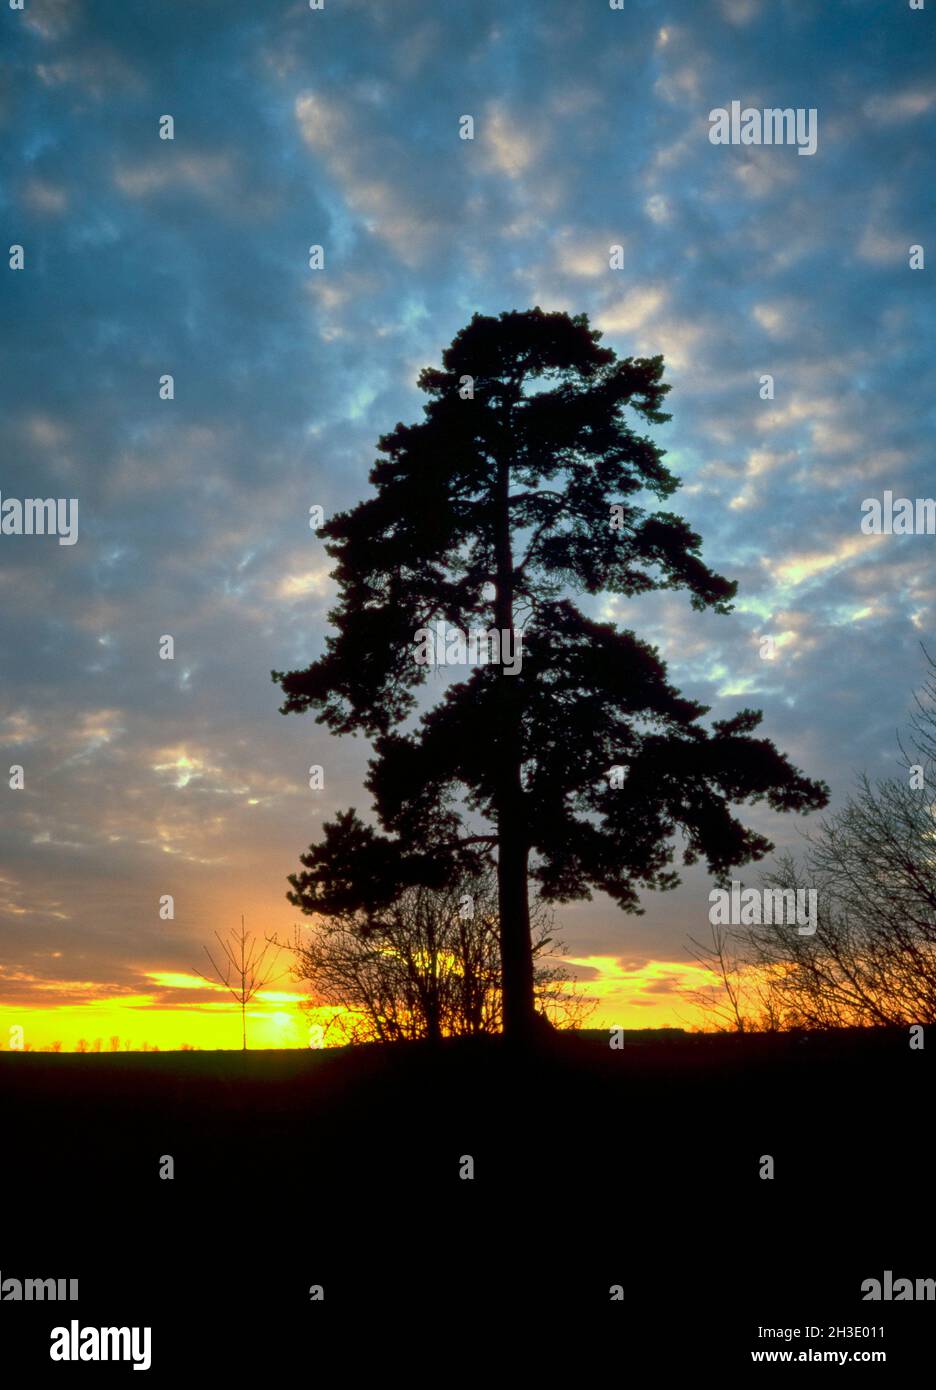 Scotch pine, Scots pine (Pinus sylvestris), Silhouette of a pine in front of setting sun, Germany, Bavaria, Donautal Stock Photo